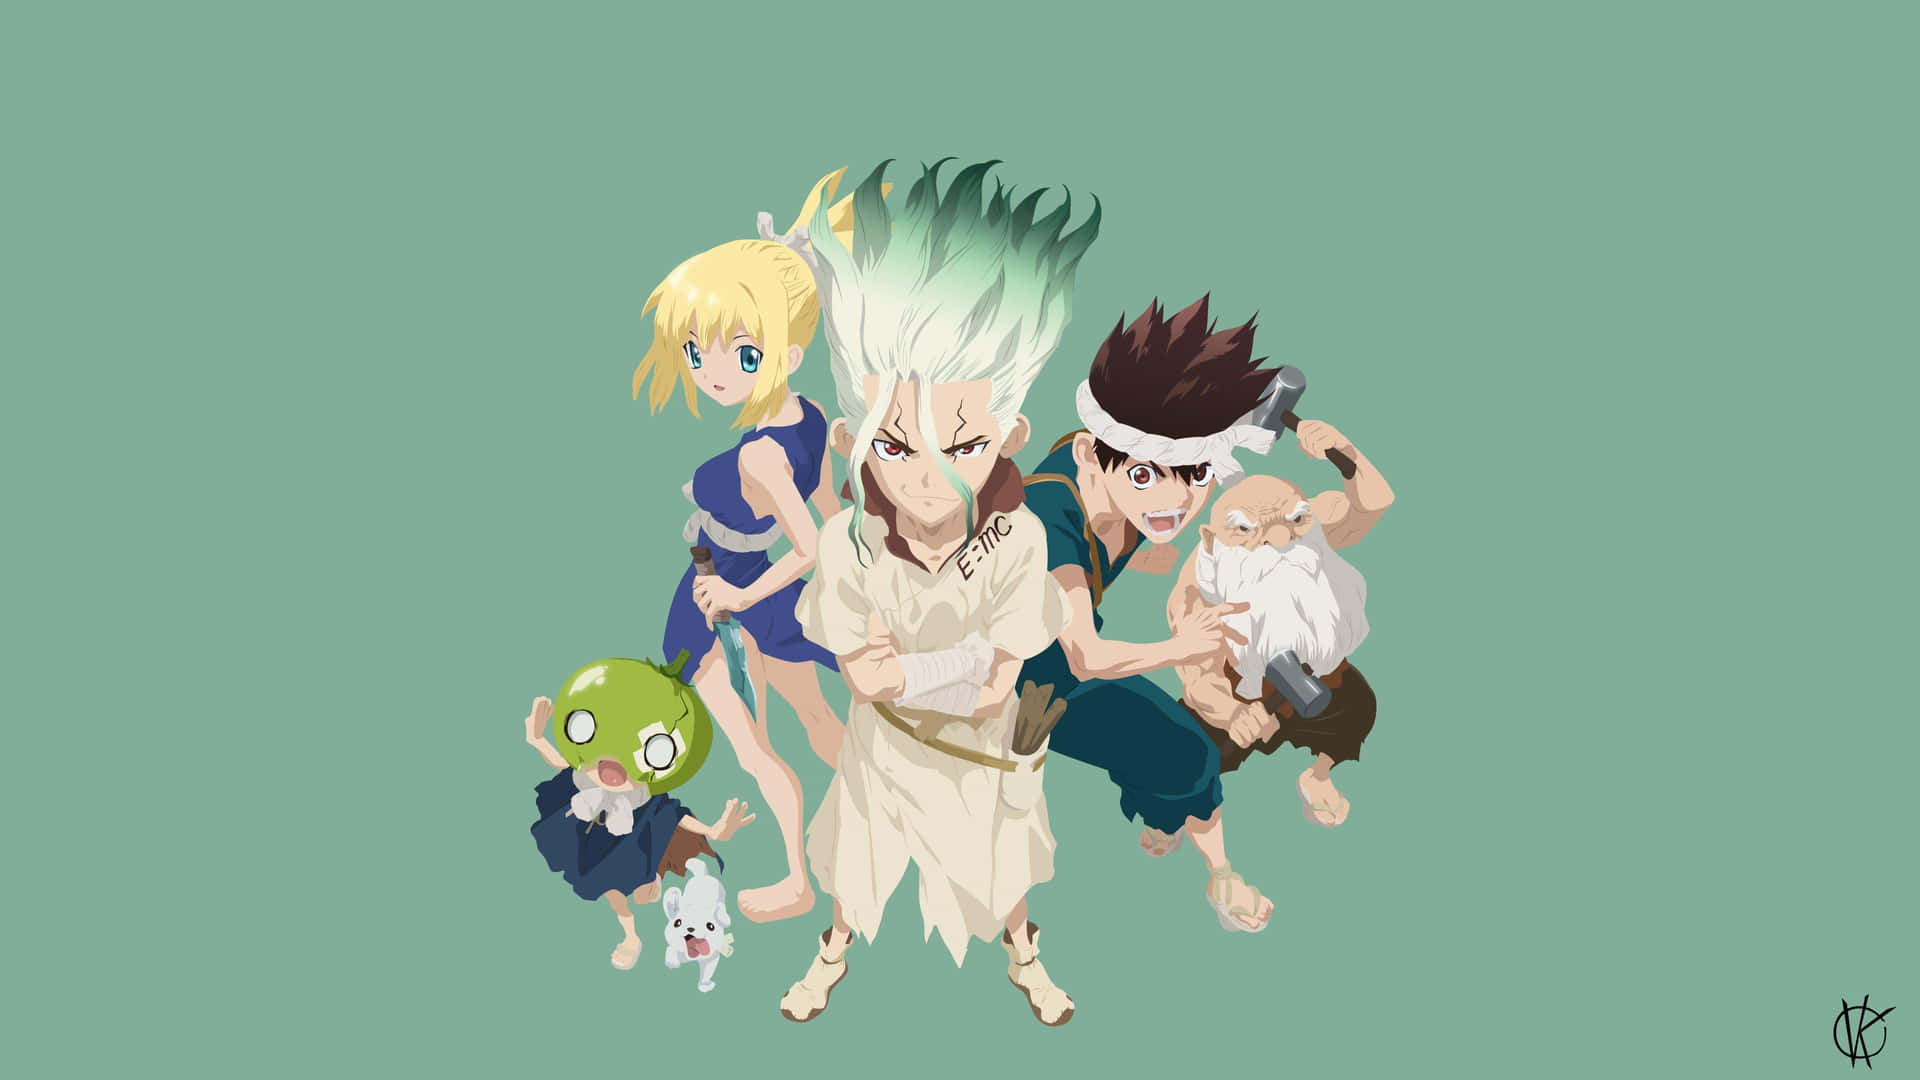 Follow the journey of Senku, a brilliant scientist determined to save humanity from Stone World